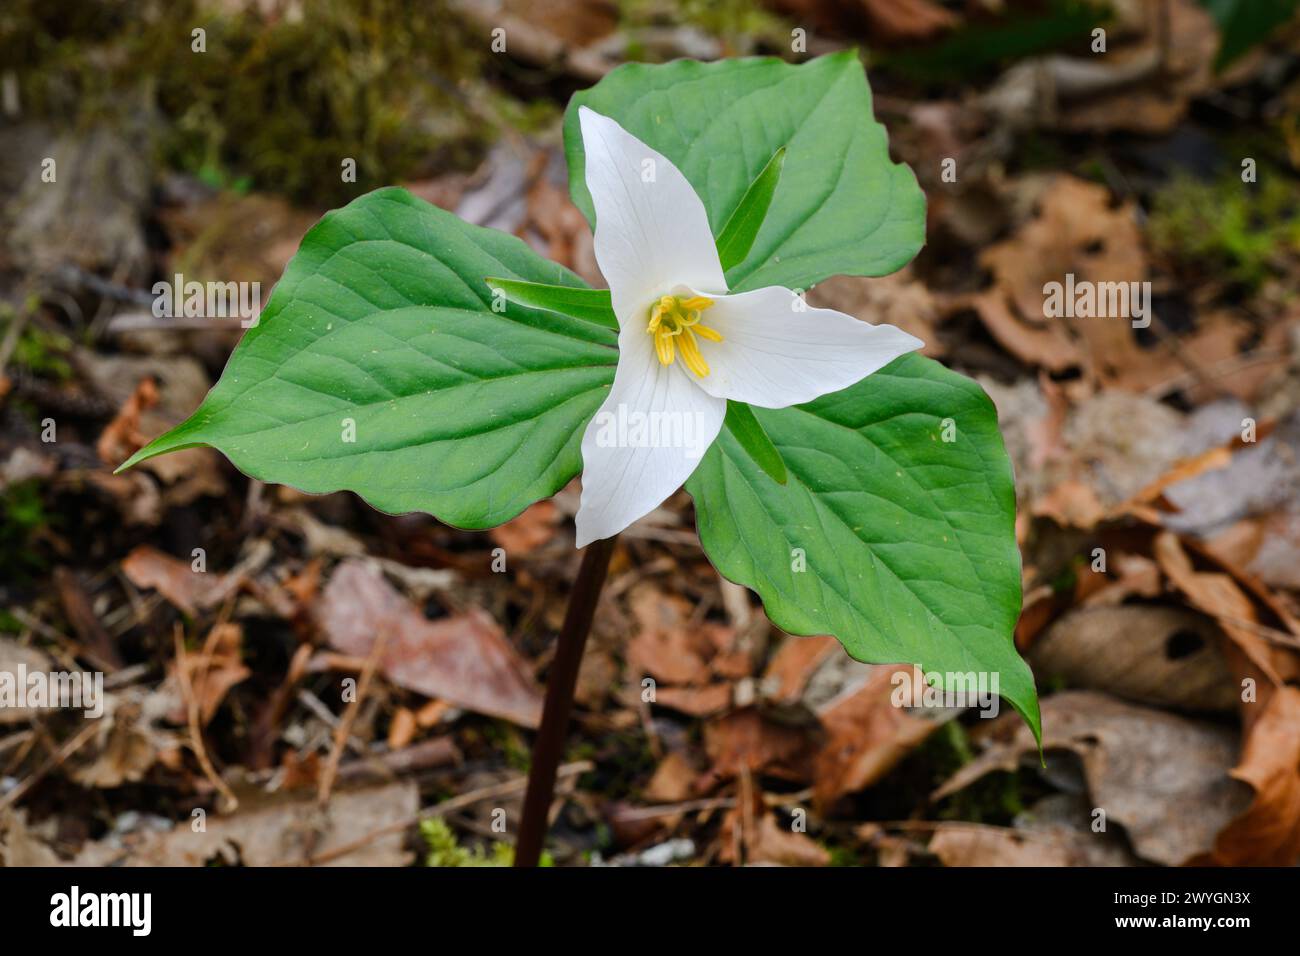 Wild western white trillium growing on forest floor in Spring with three green bracts Stock Photo